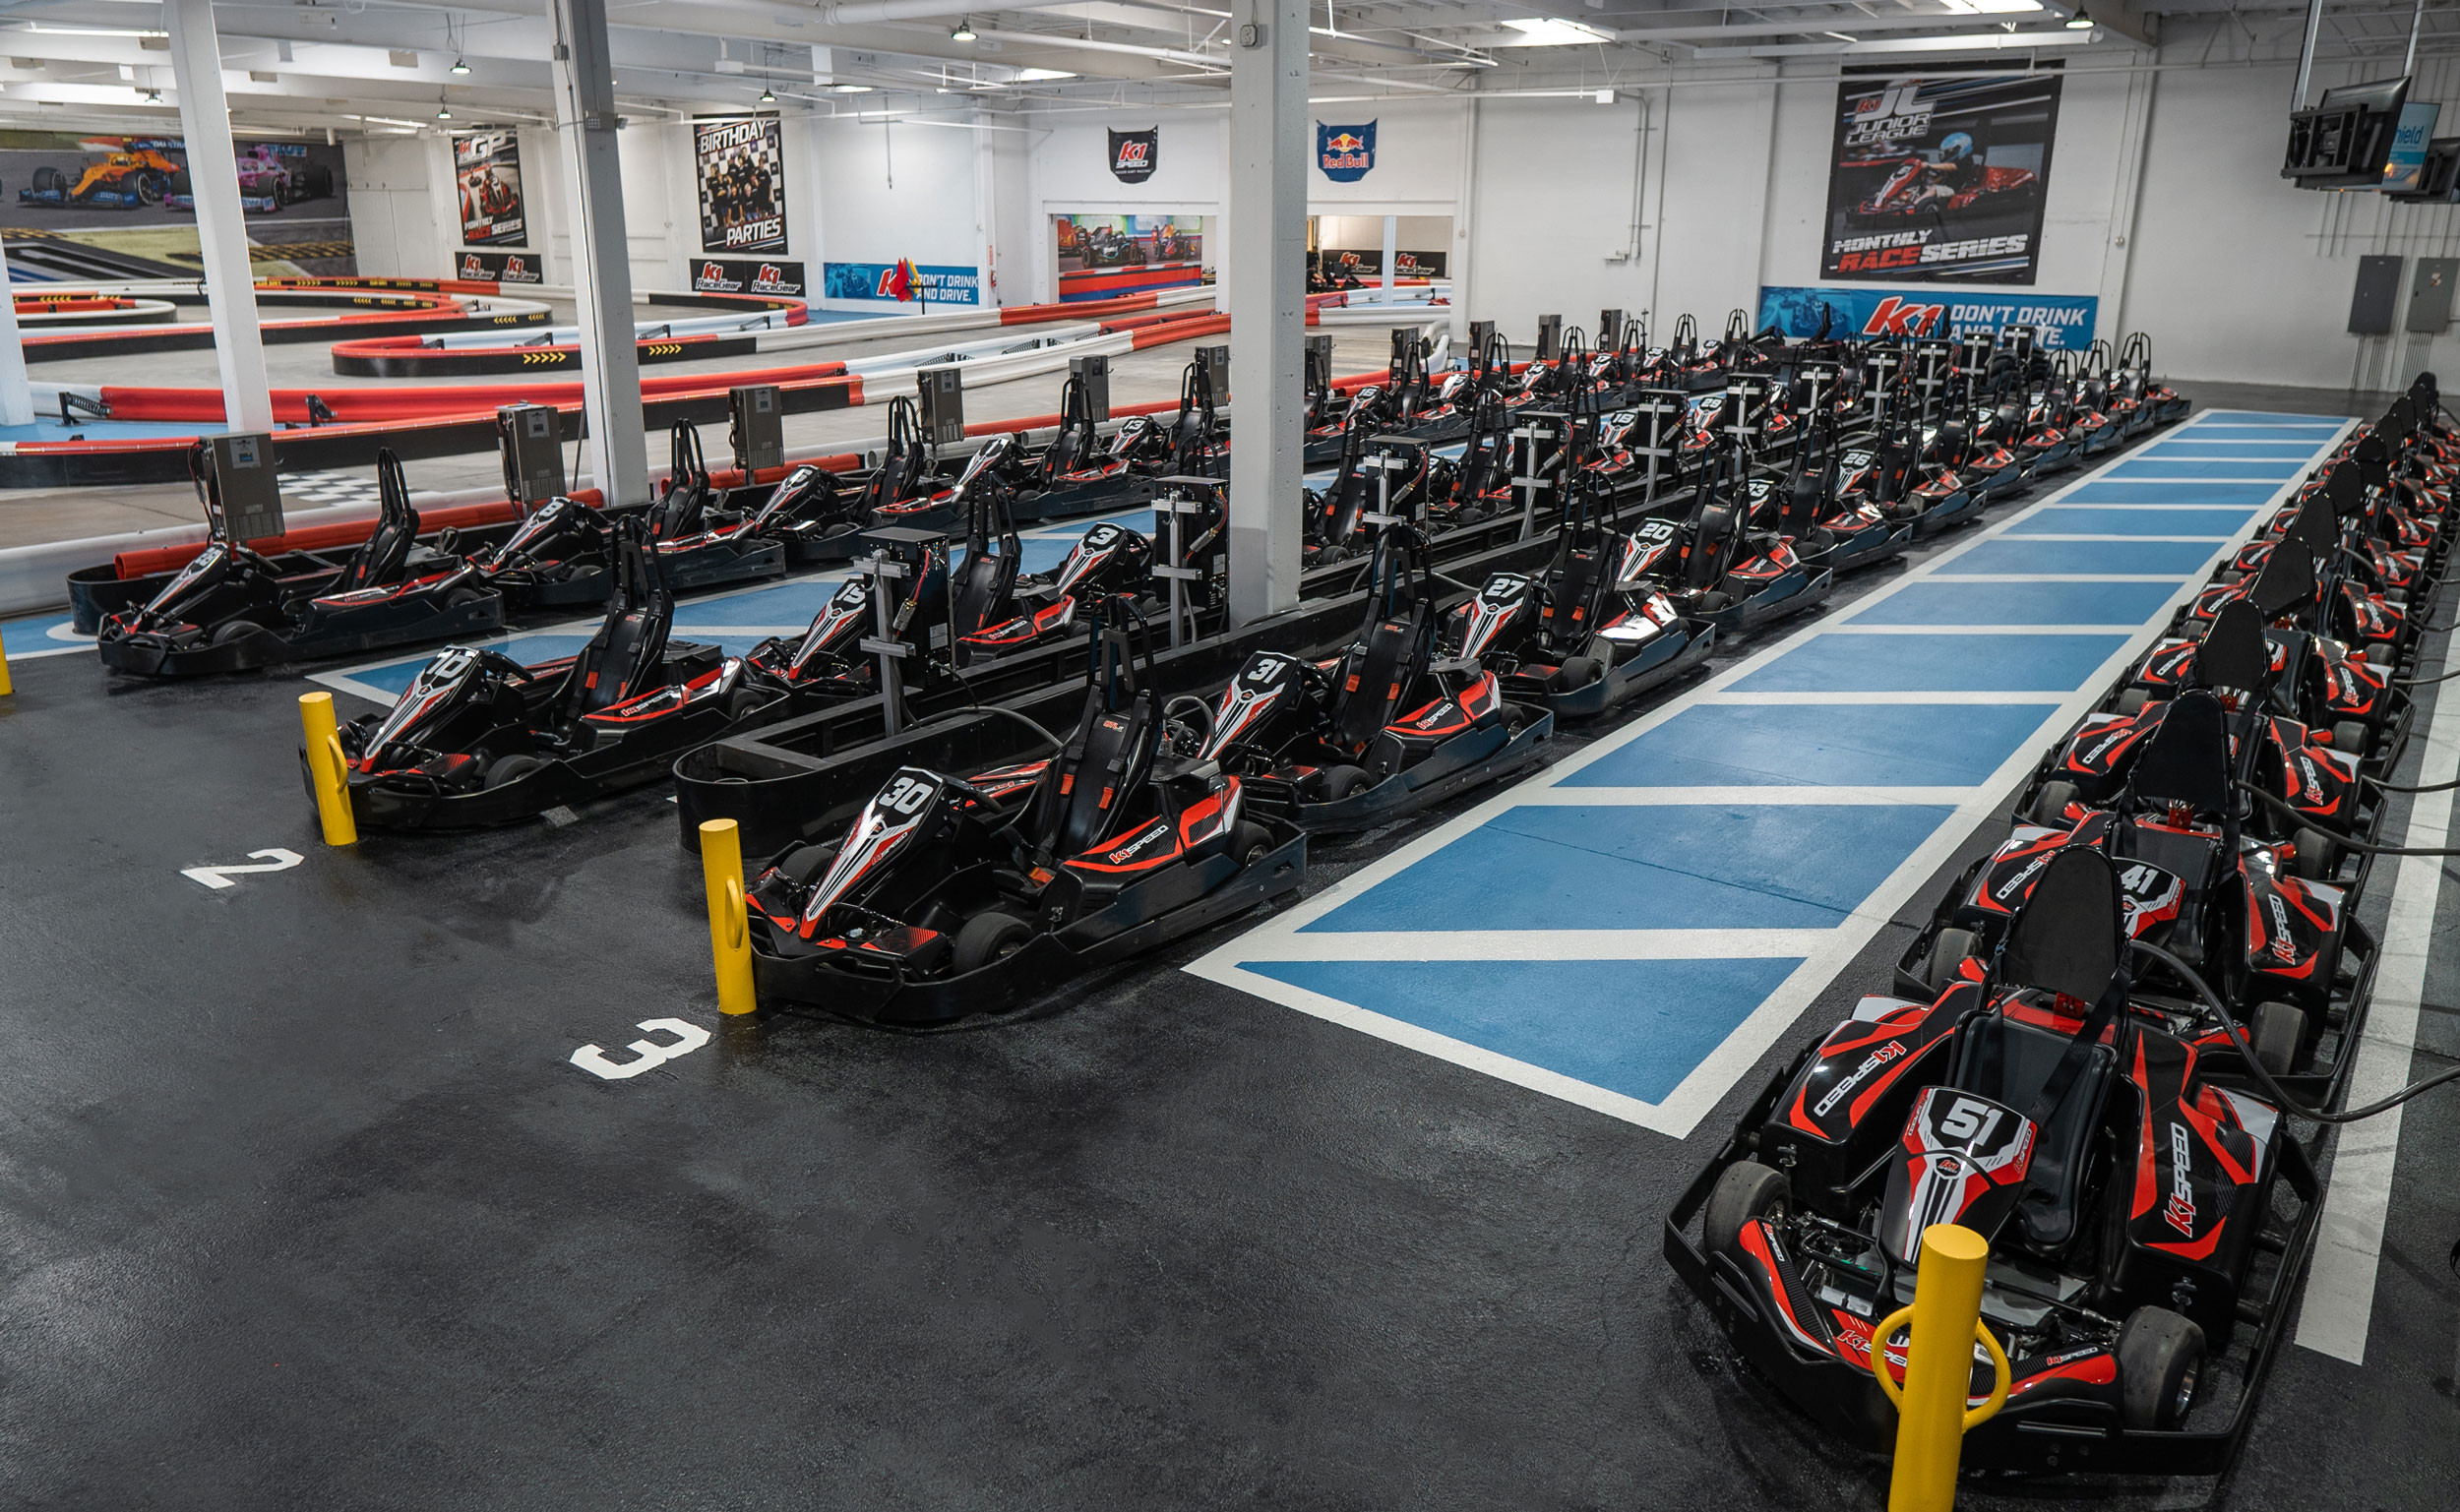 K1 Speed Burbank's state-of-the-art electric go karts are imported directly from Italy. Kids can enjoy their Junior Karts, while teens/adults can race Adult Karts that go up to 45mph.